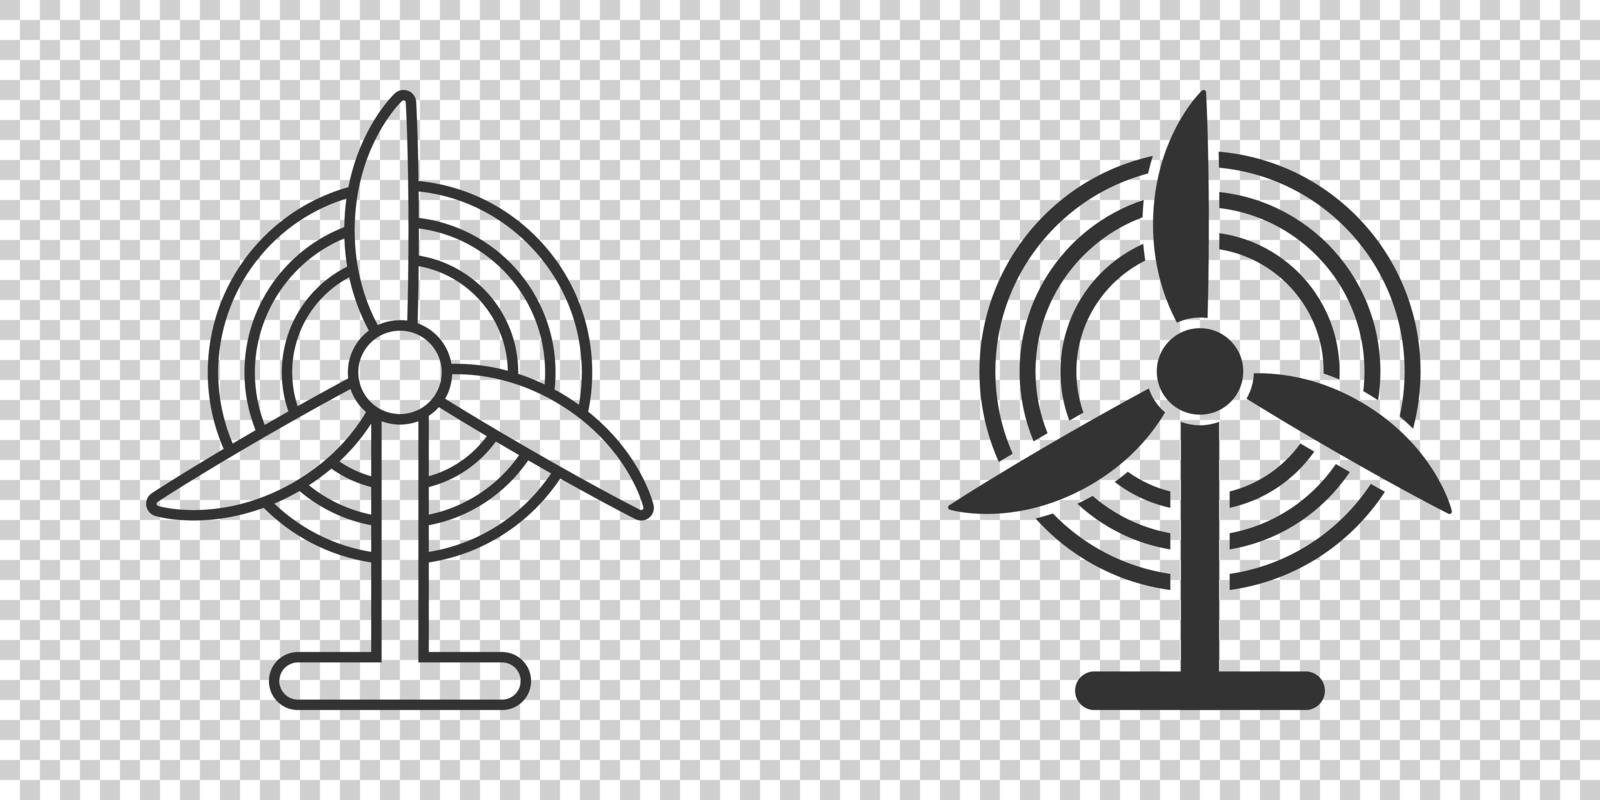 Wind power plant icon in flat style. Turbine vector illustration on white isolated background. Air energy sign business concept. by LysenkoA